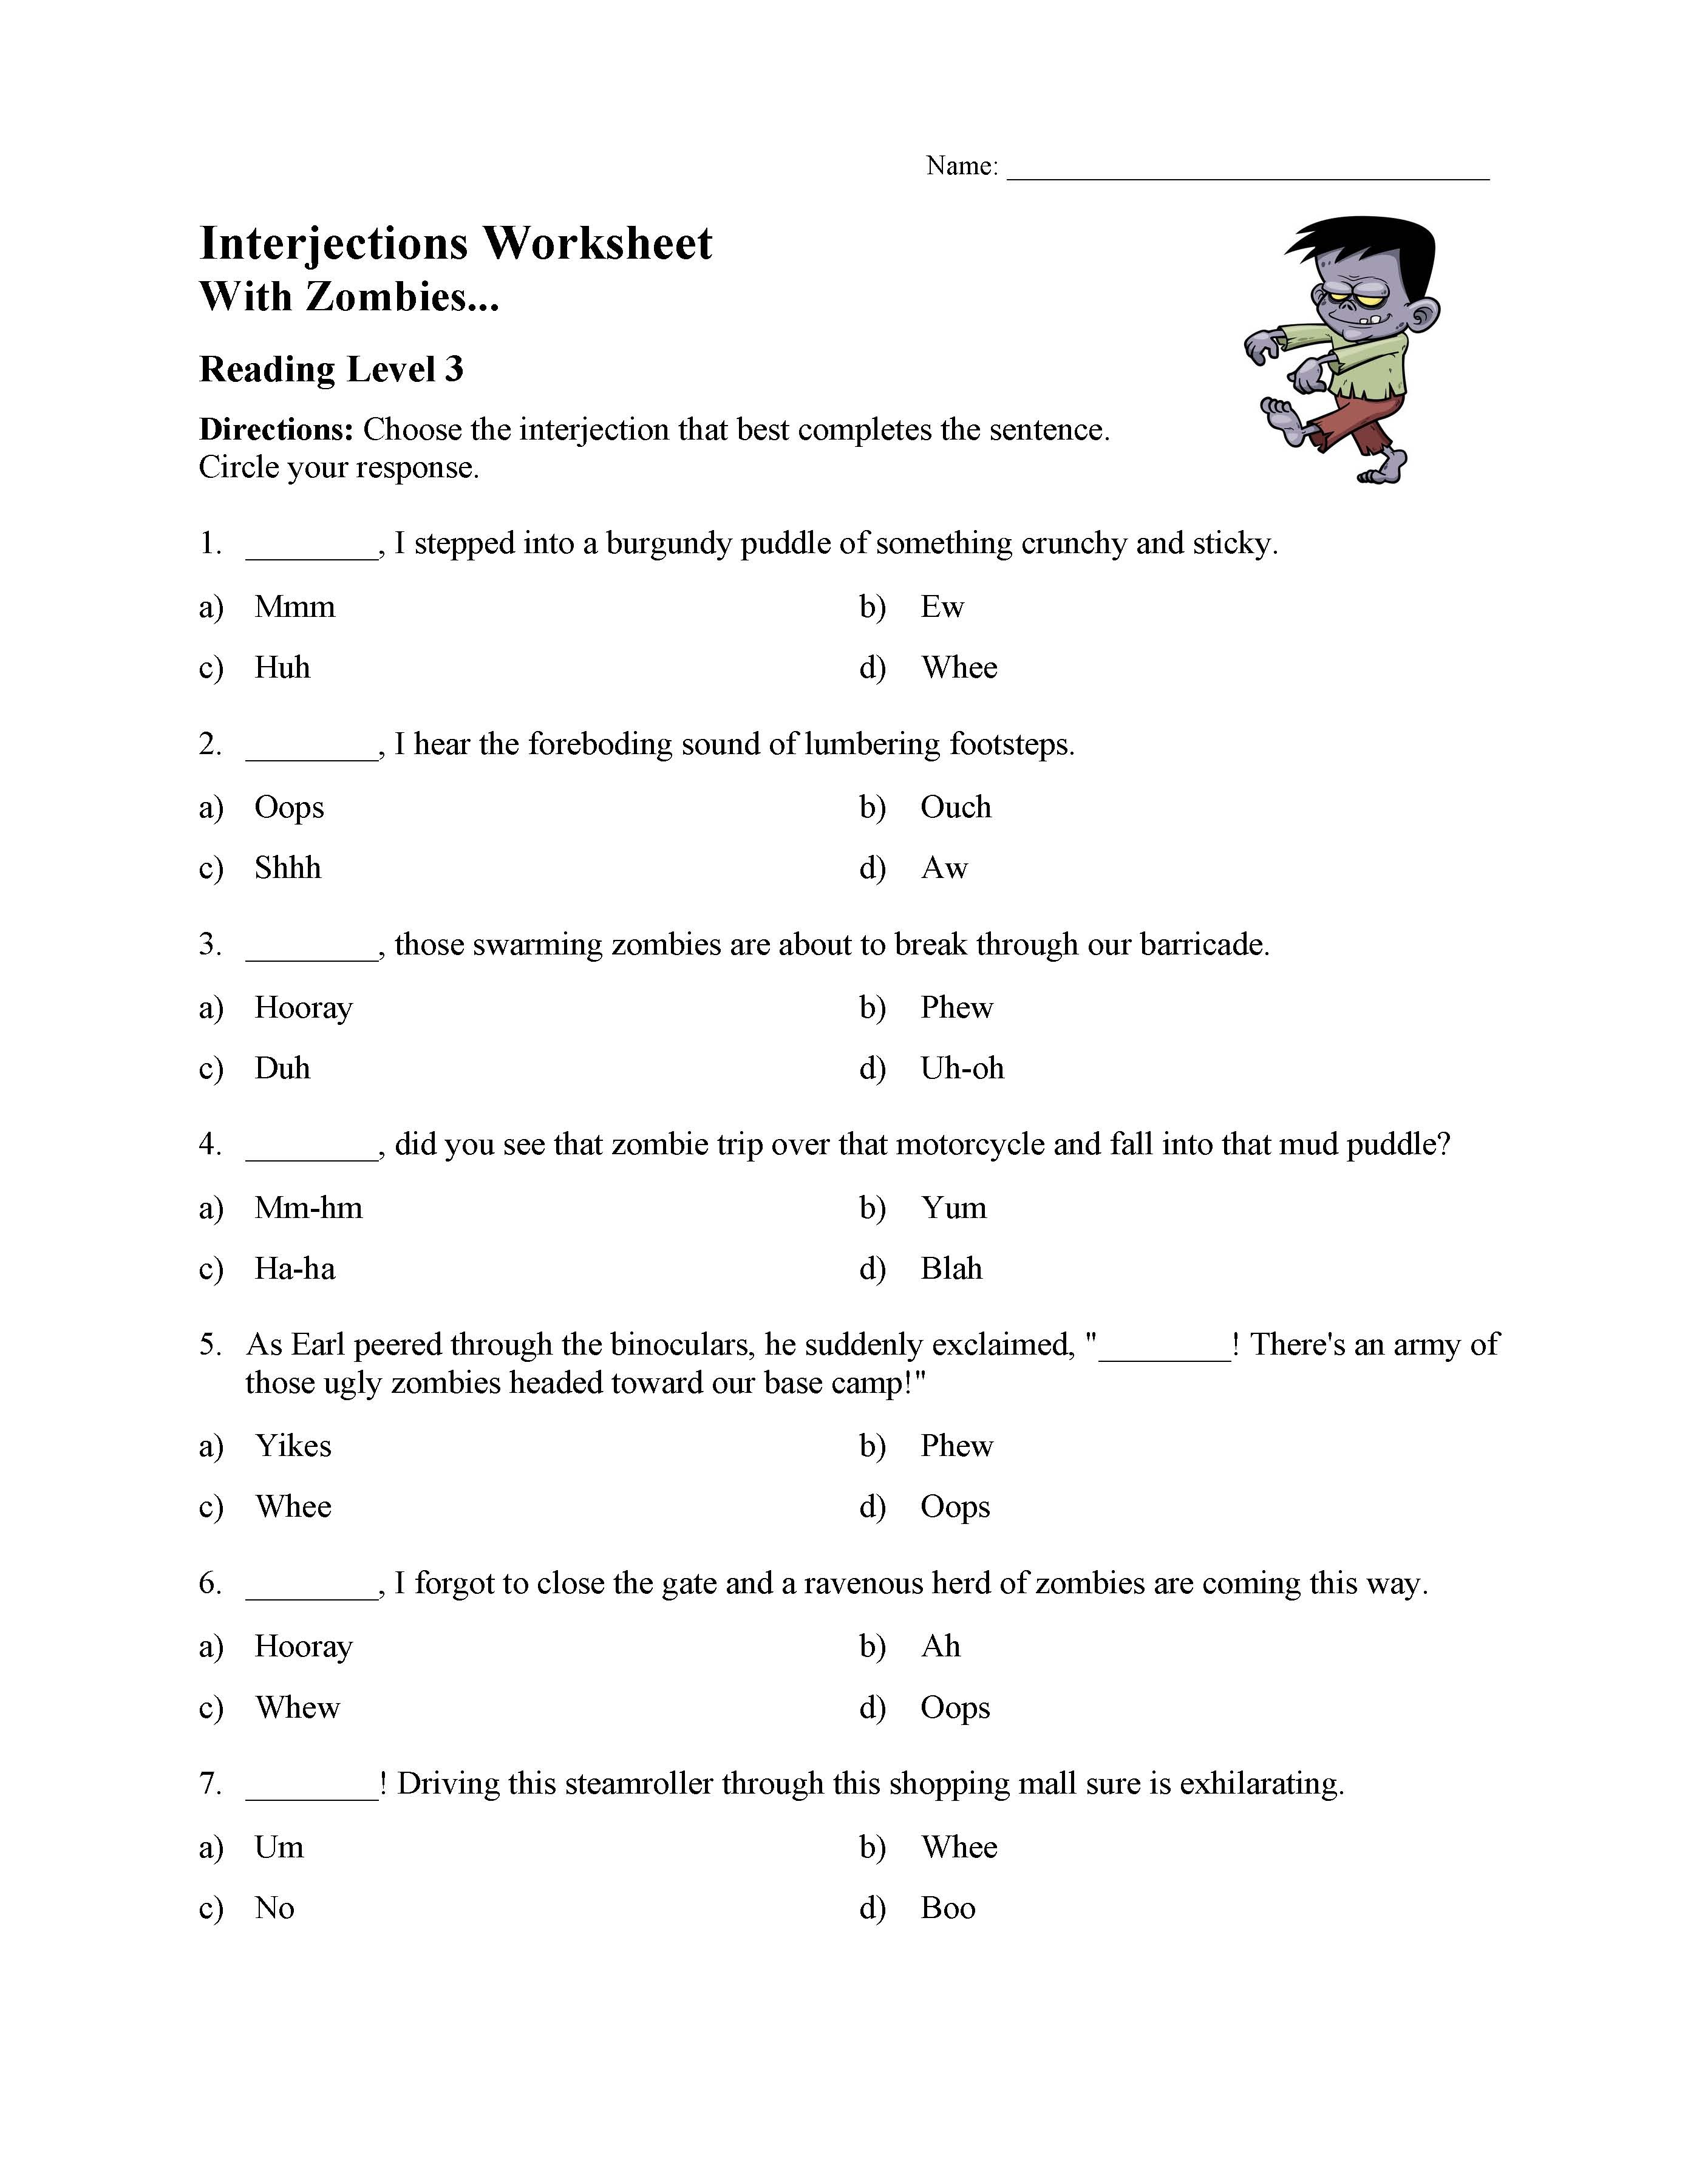 This is a preview image of the Interjections Worksheet - Reading Level 3.